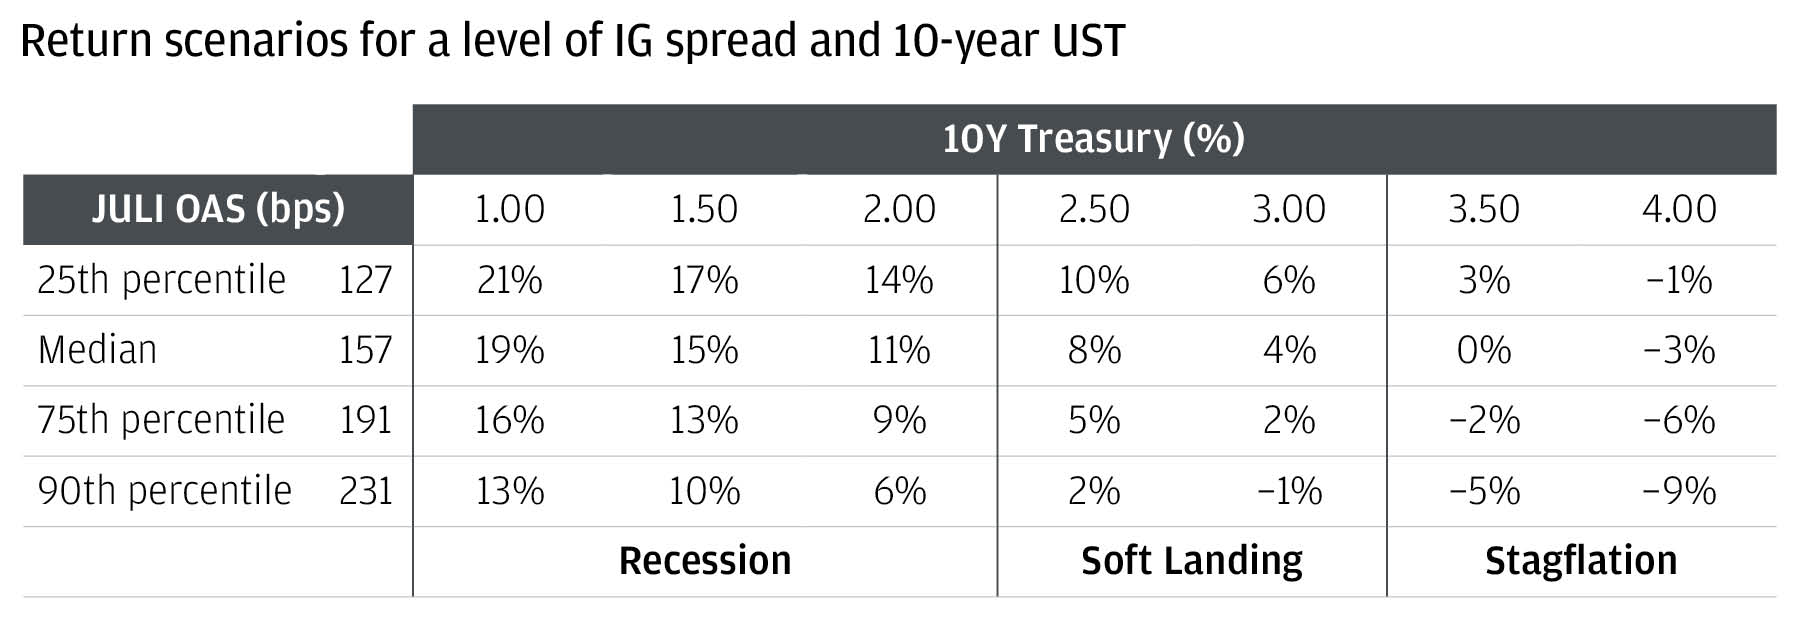 As rates fall in a recession, long-dated IG bonds provide high returns‚Äîwith some downside in a stagflationary environment.